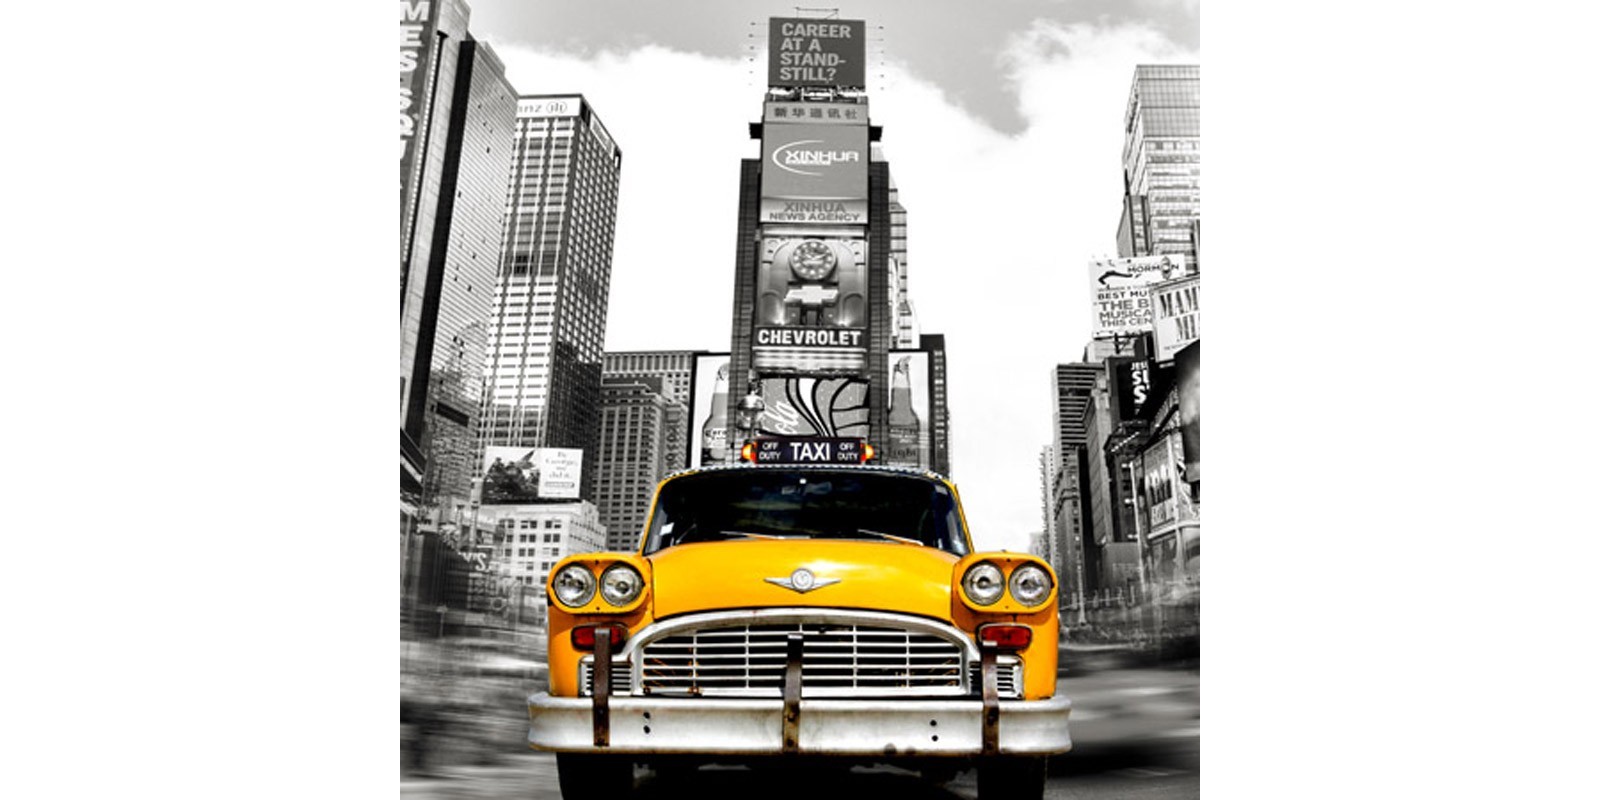 Julian Lauren - Vintage Taxi in Times Square, NYC (detail)